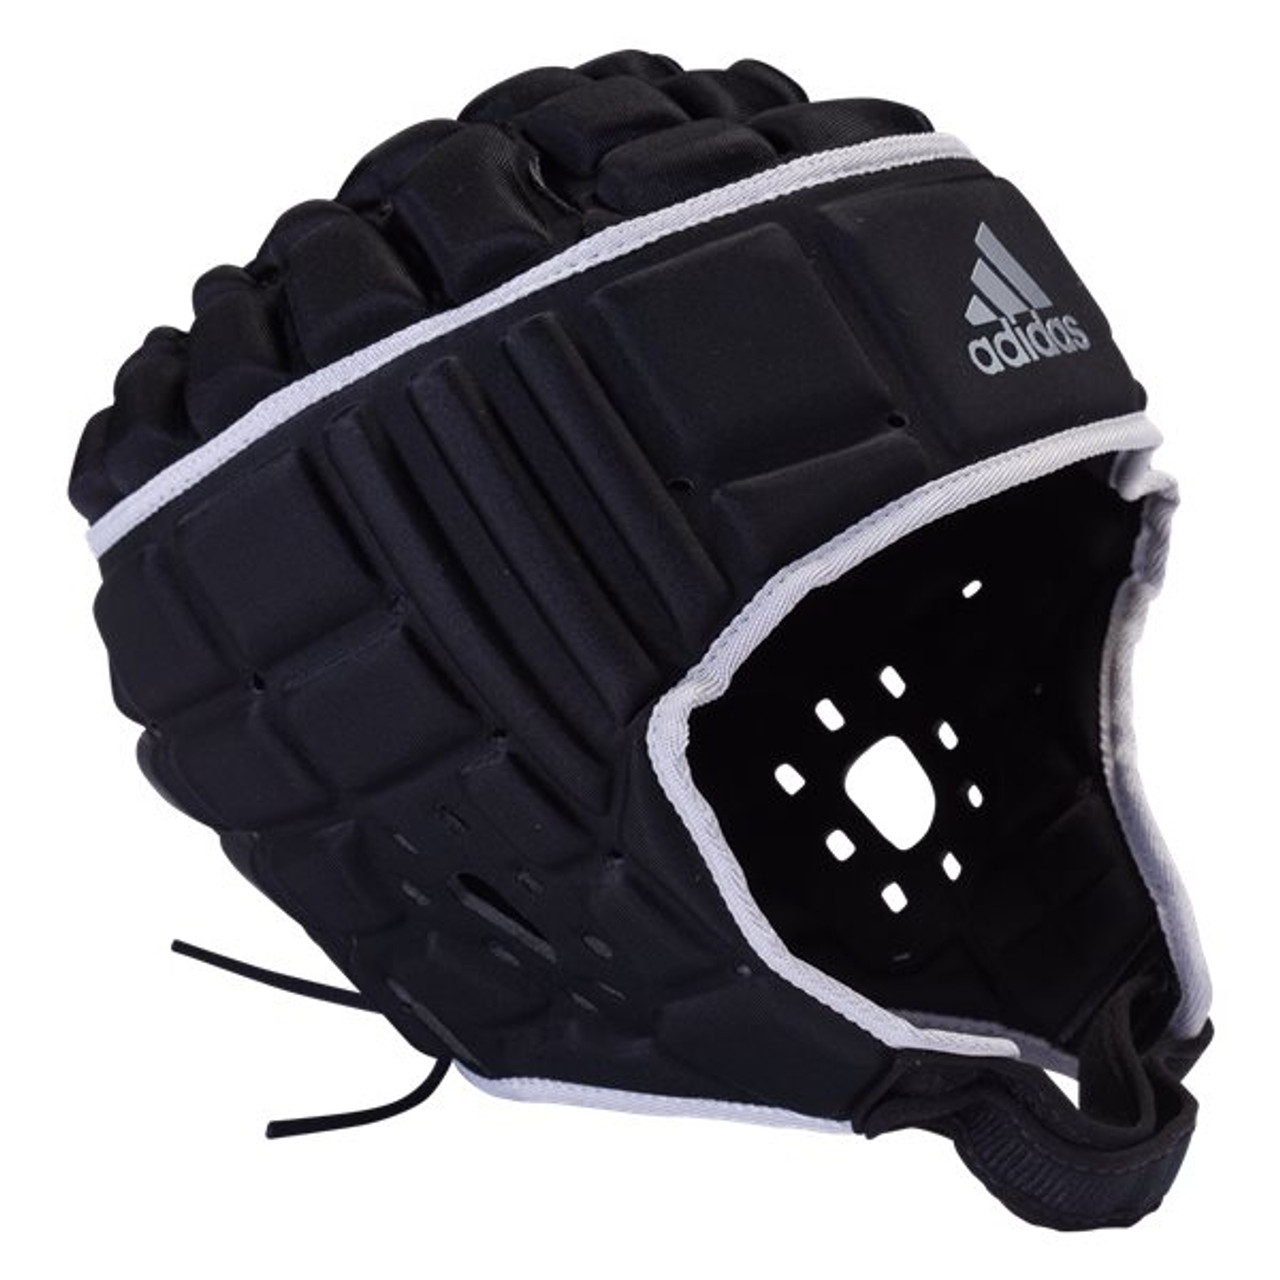 Withered Scully Skelne Adidas Rugby Scrum Cap - Black on sale at Rugby City | 49.99